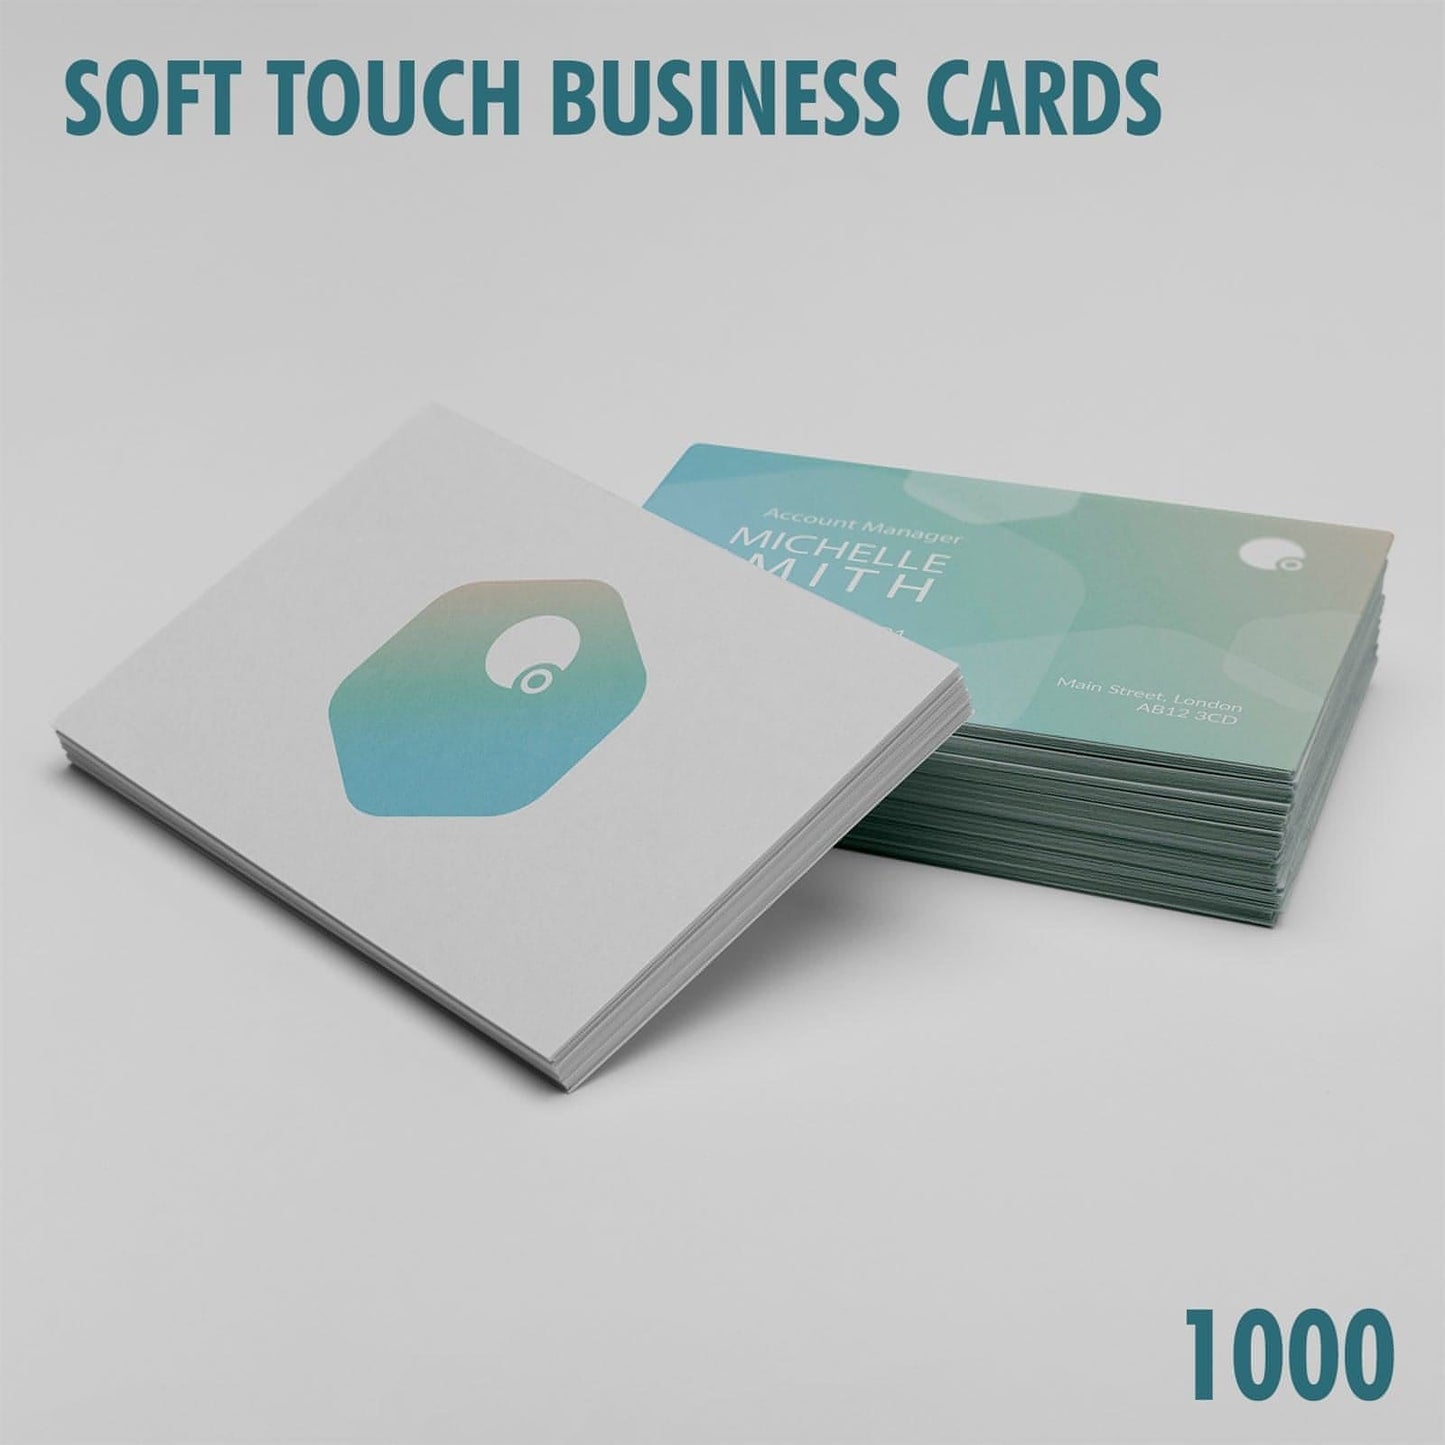 SOFT TOUCH BUSINESS CARDS